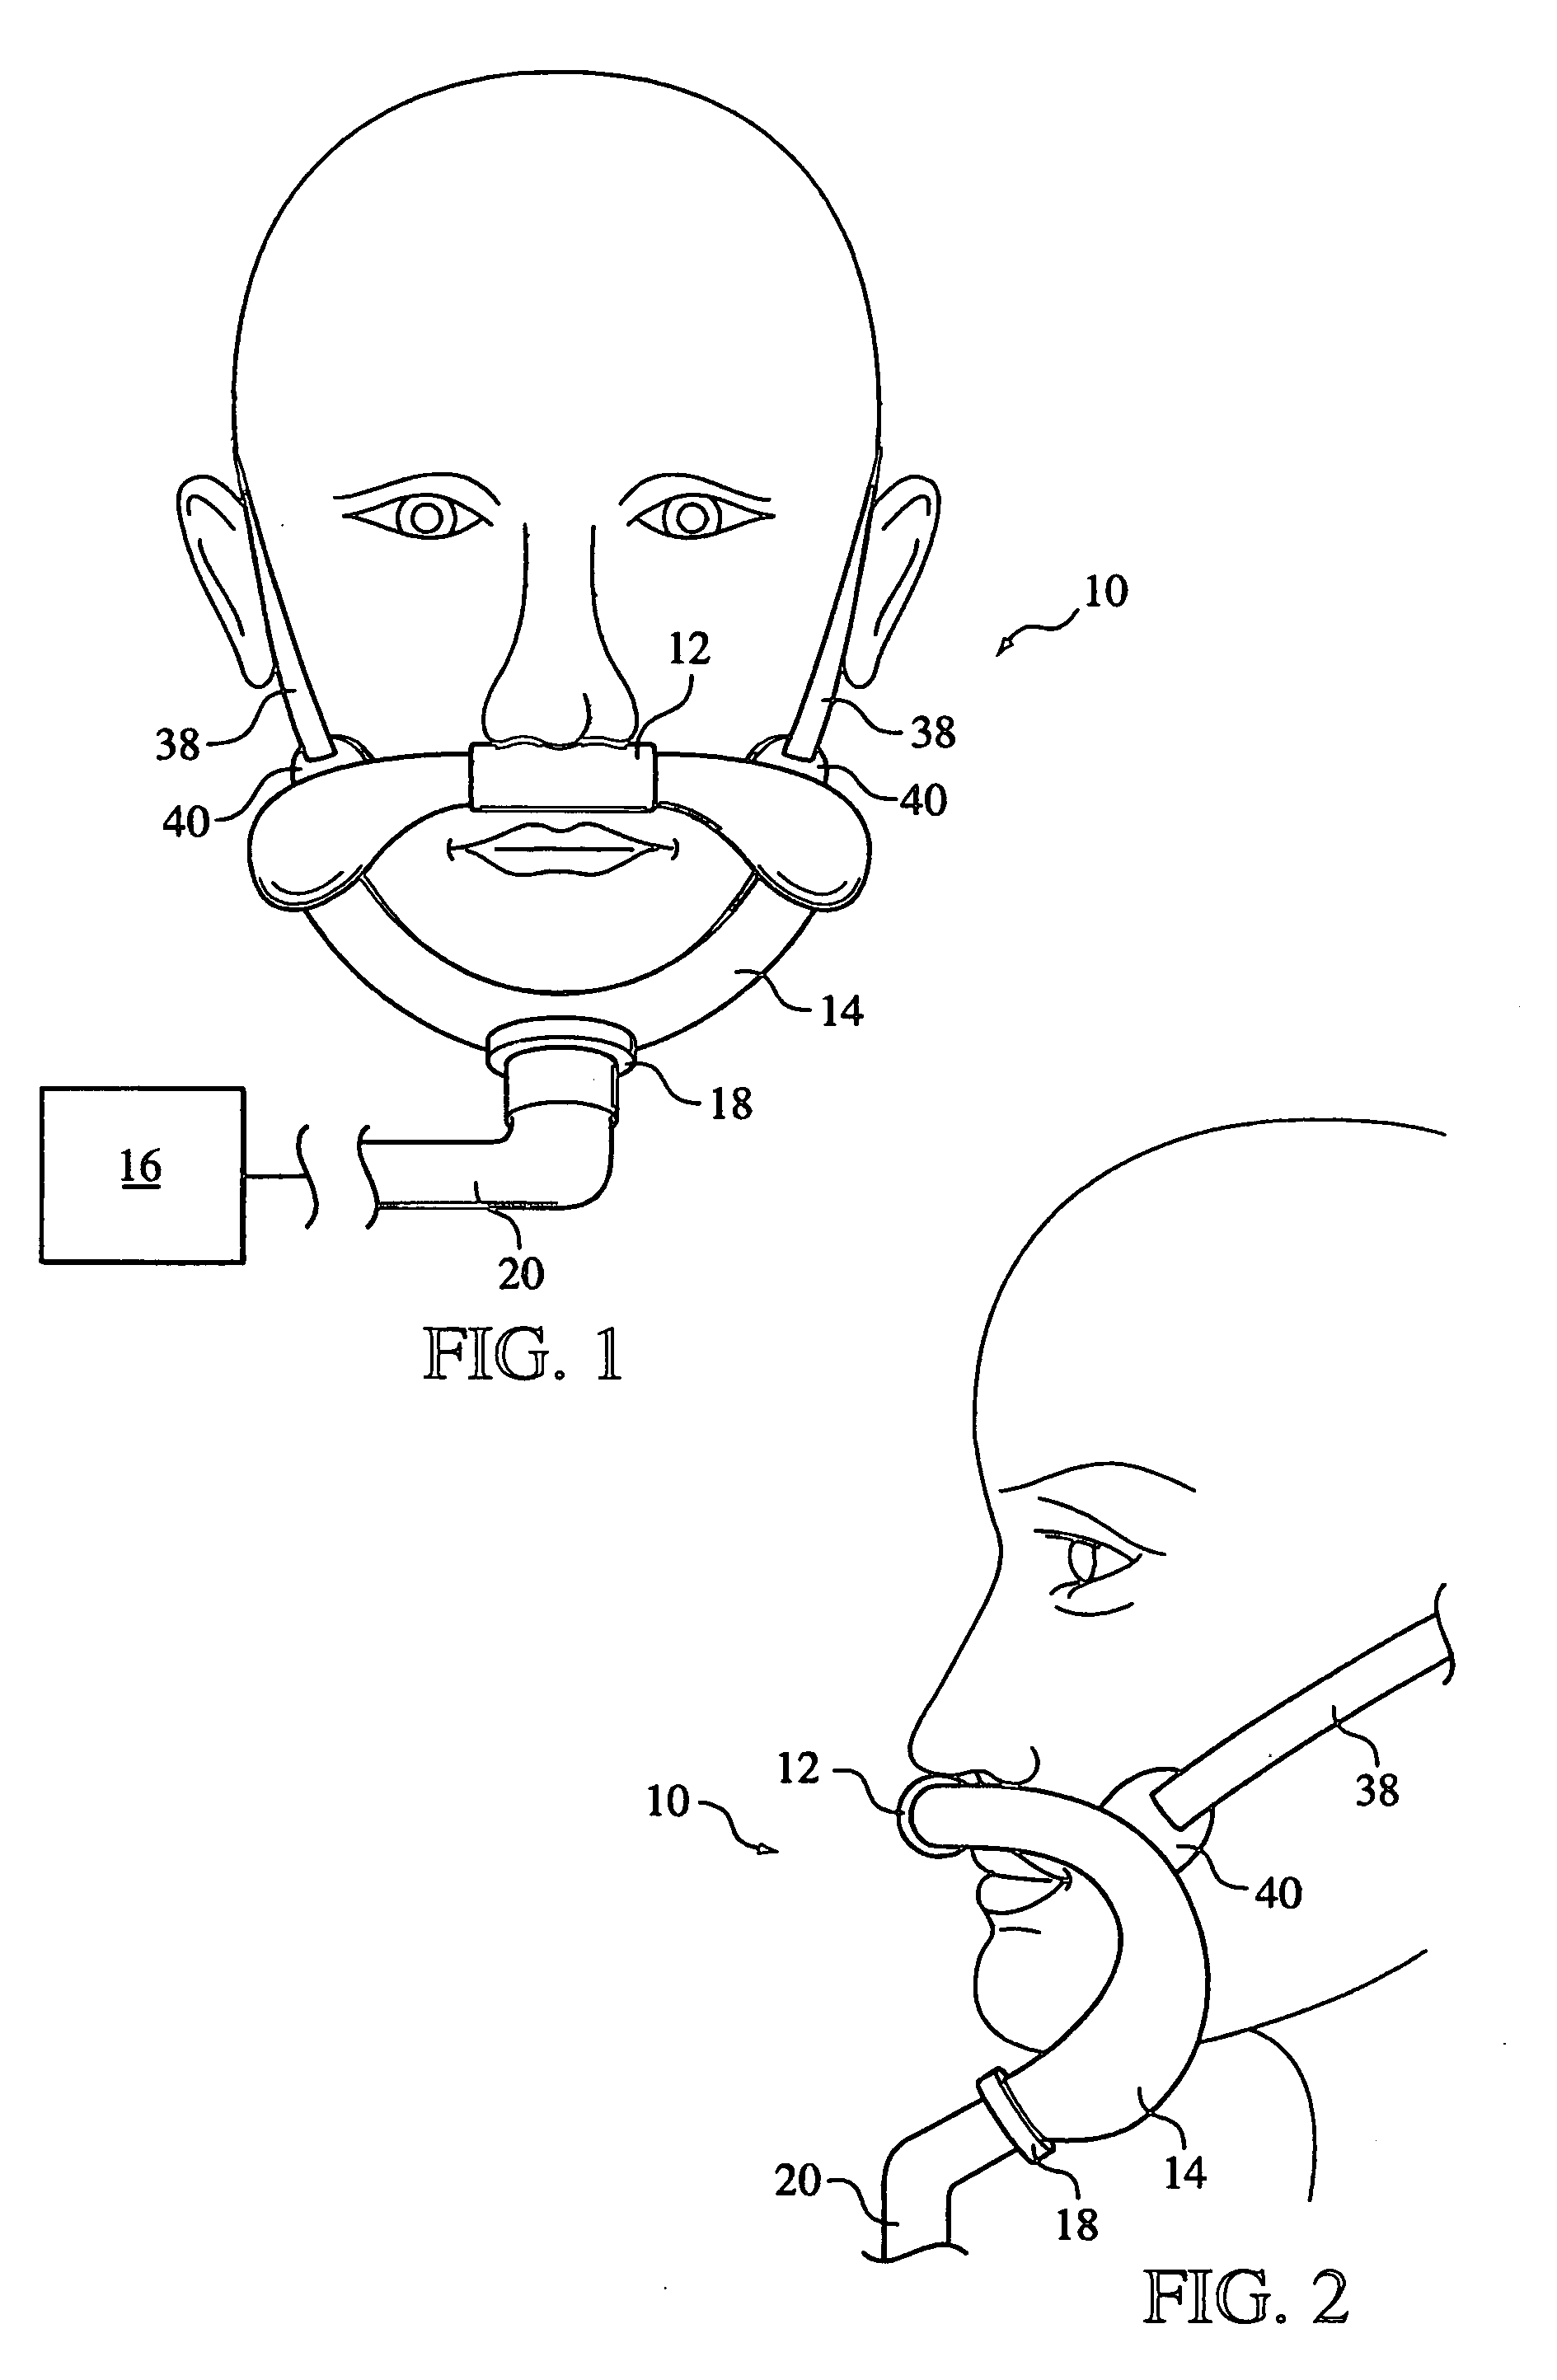 Patient intreface assembly supported under the mandible